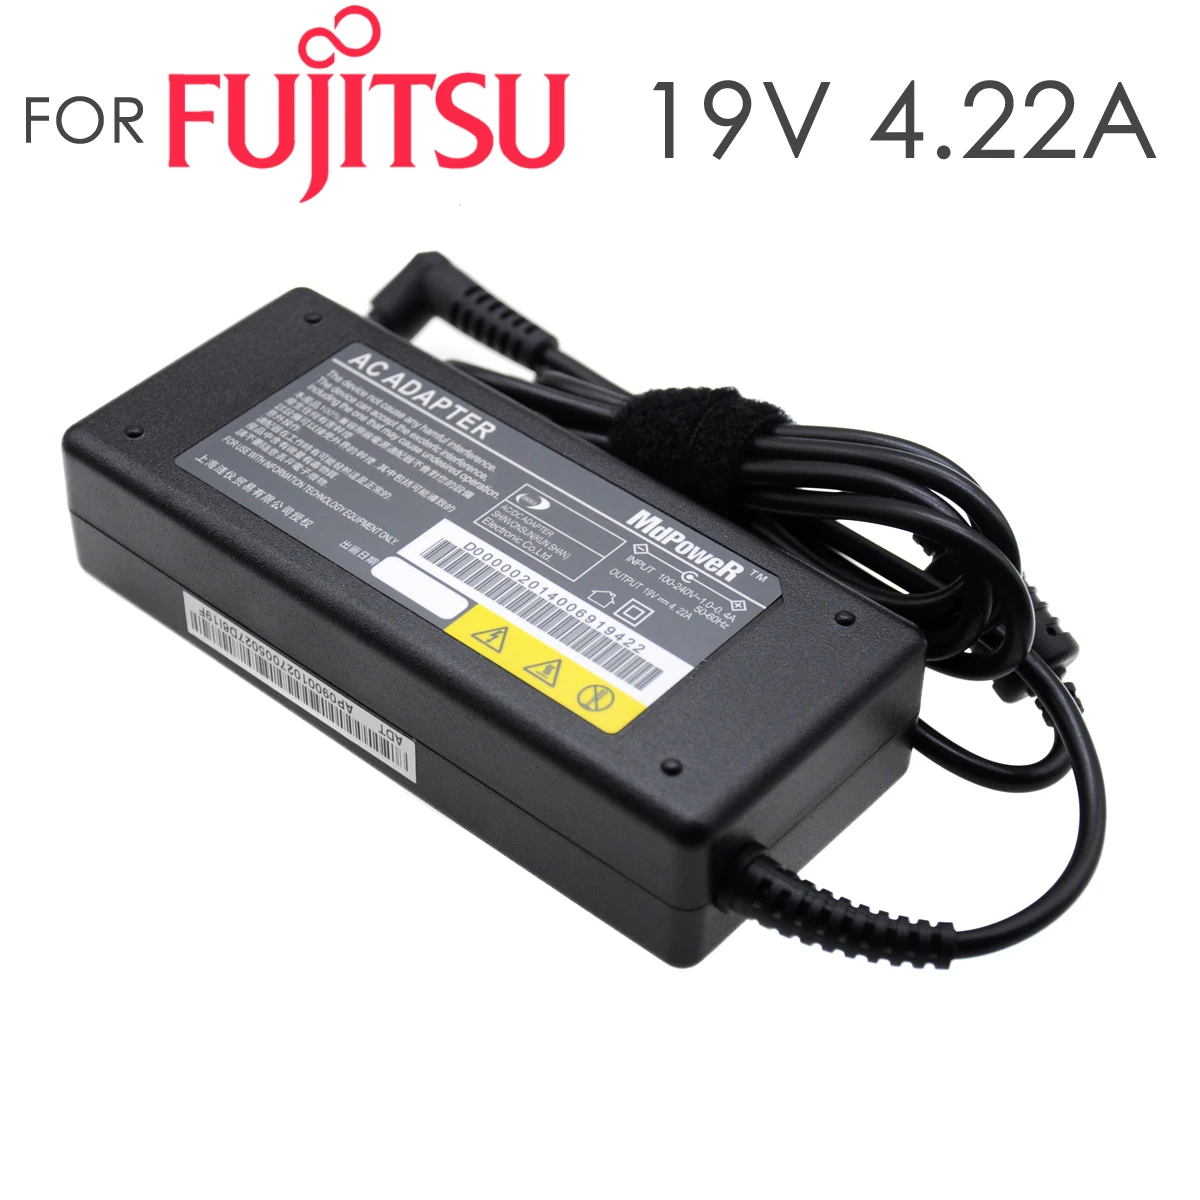 

For FujitsuT1010B T2010 T2020 T3010 T4010 T4020 T4210 T4215 T4215E T4220 T4410 laptop power supply AC adapter charger 19V 4.22A